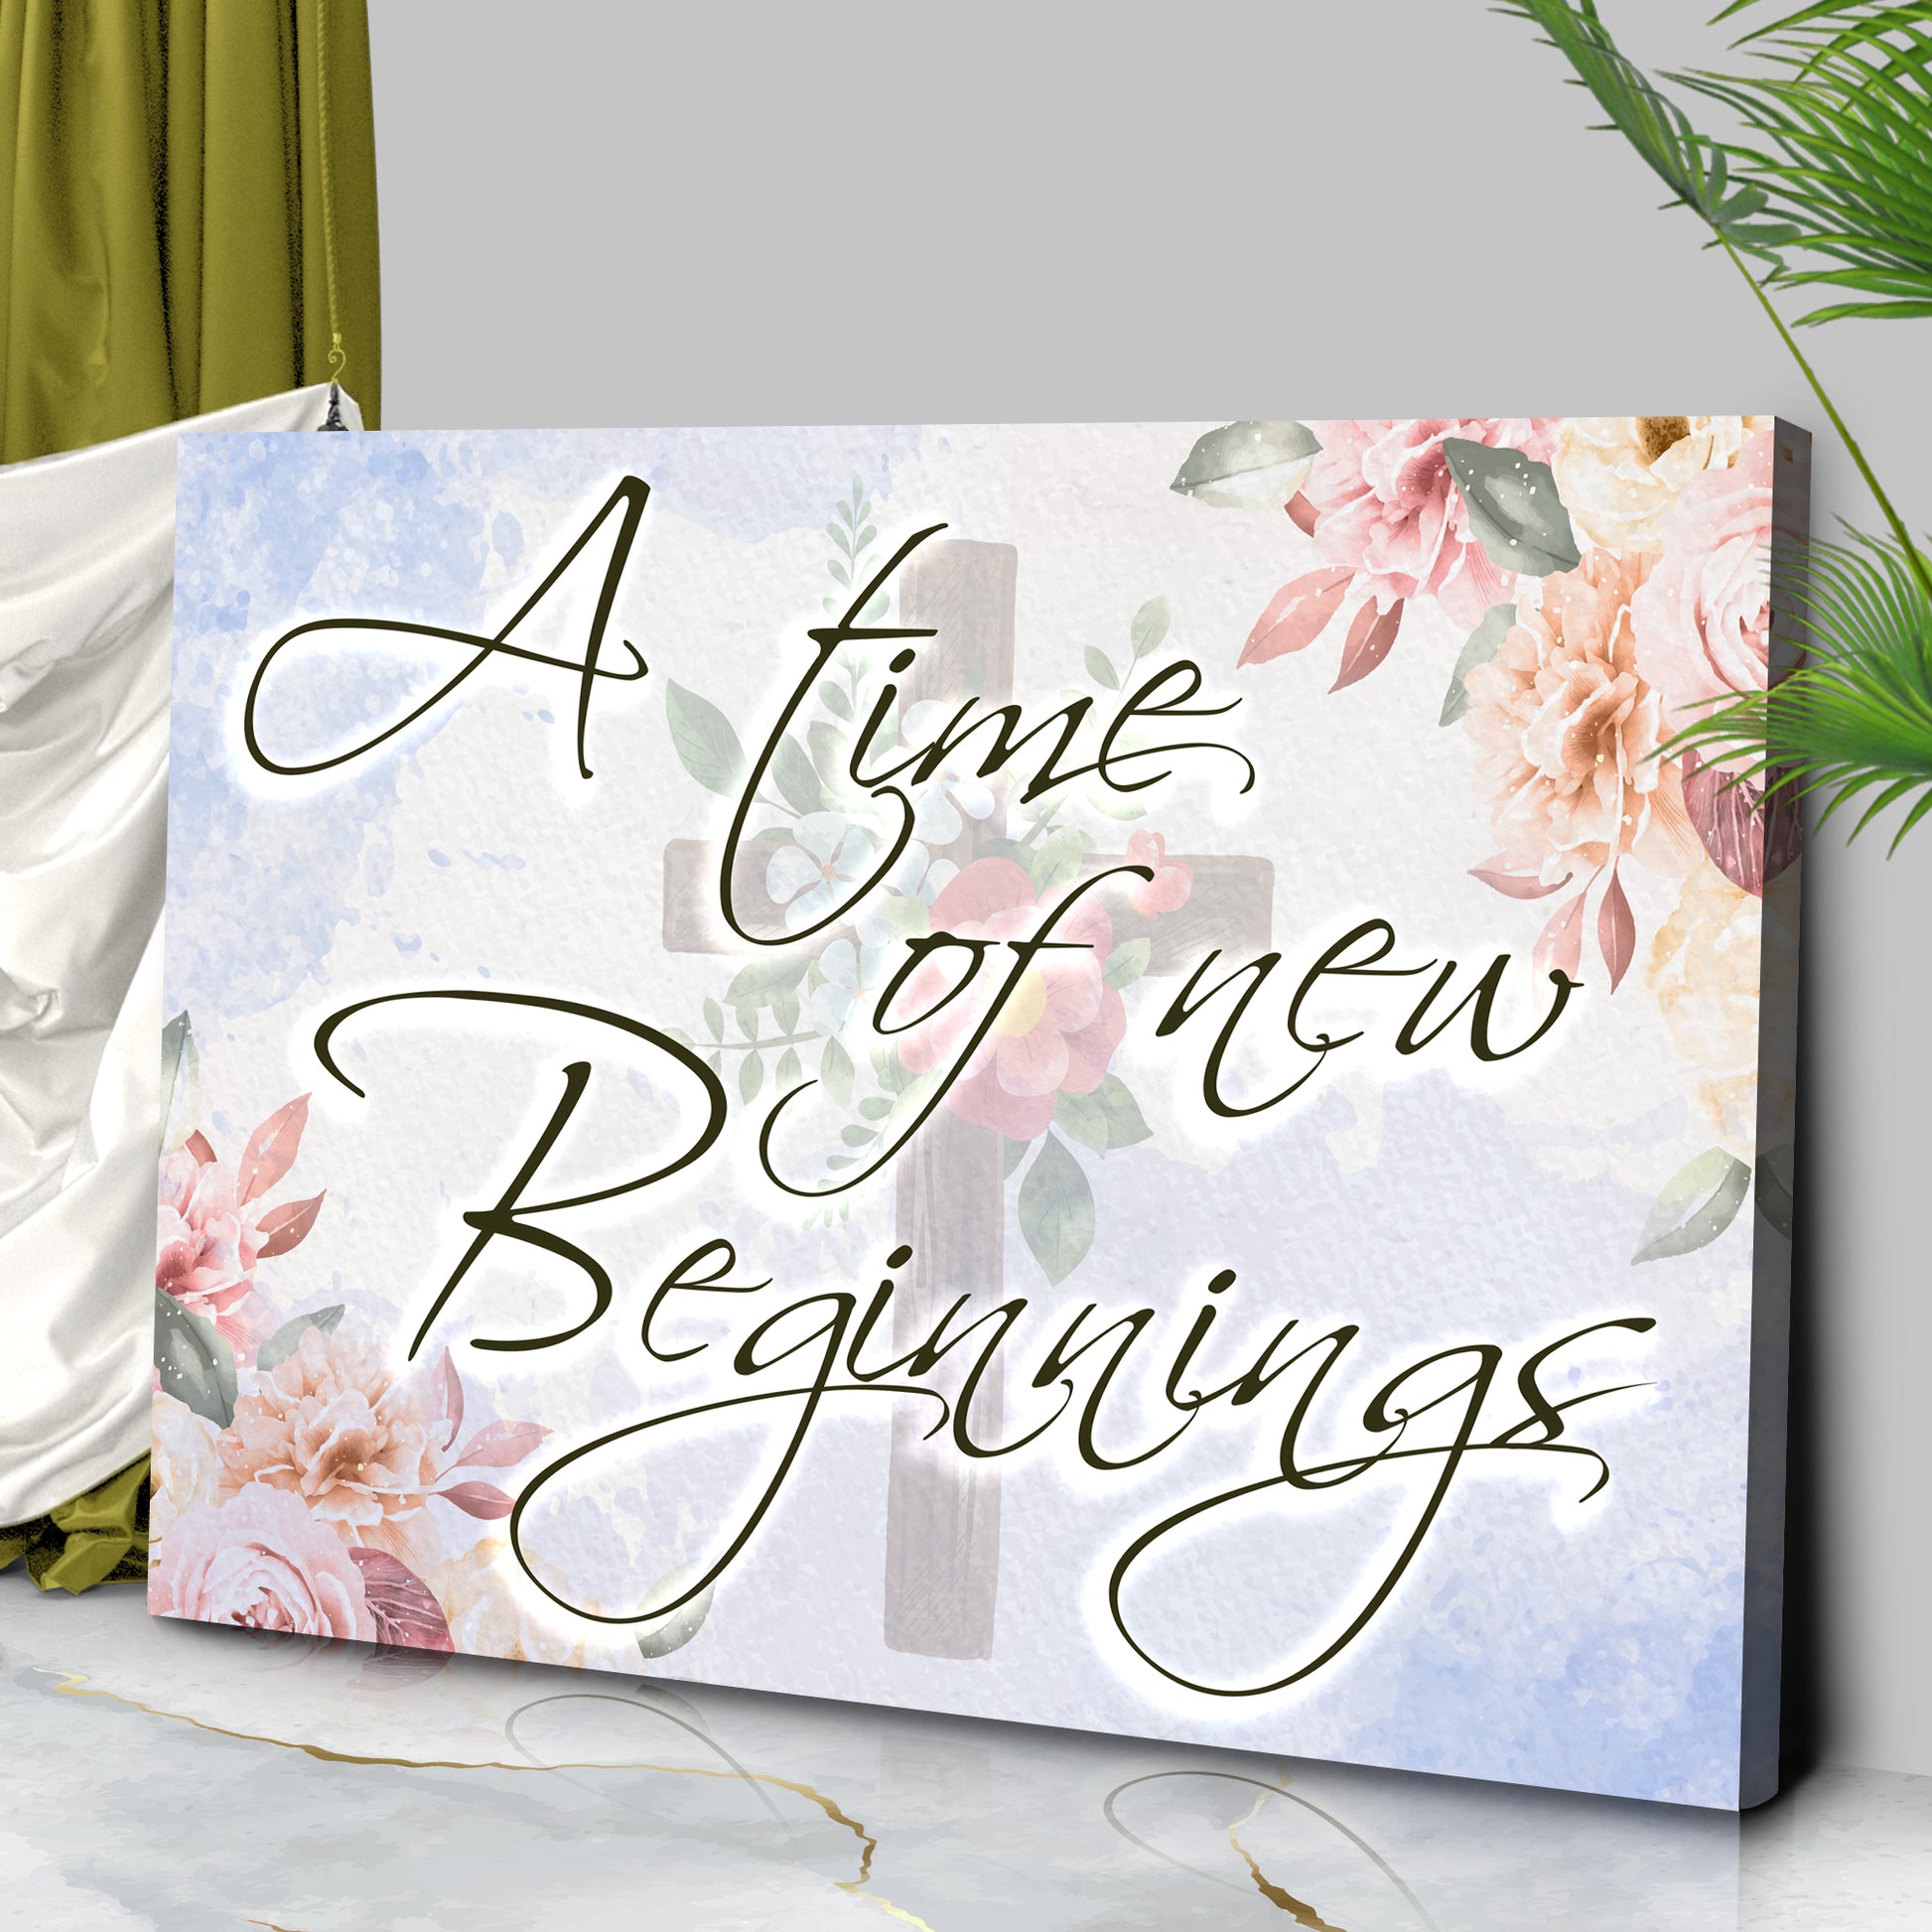 A Time Of New Beginnings Sign Style 2 - Image by Tailored Canvases